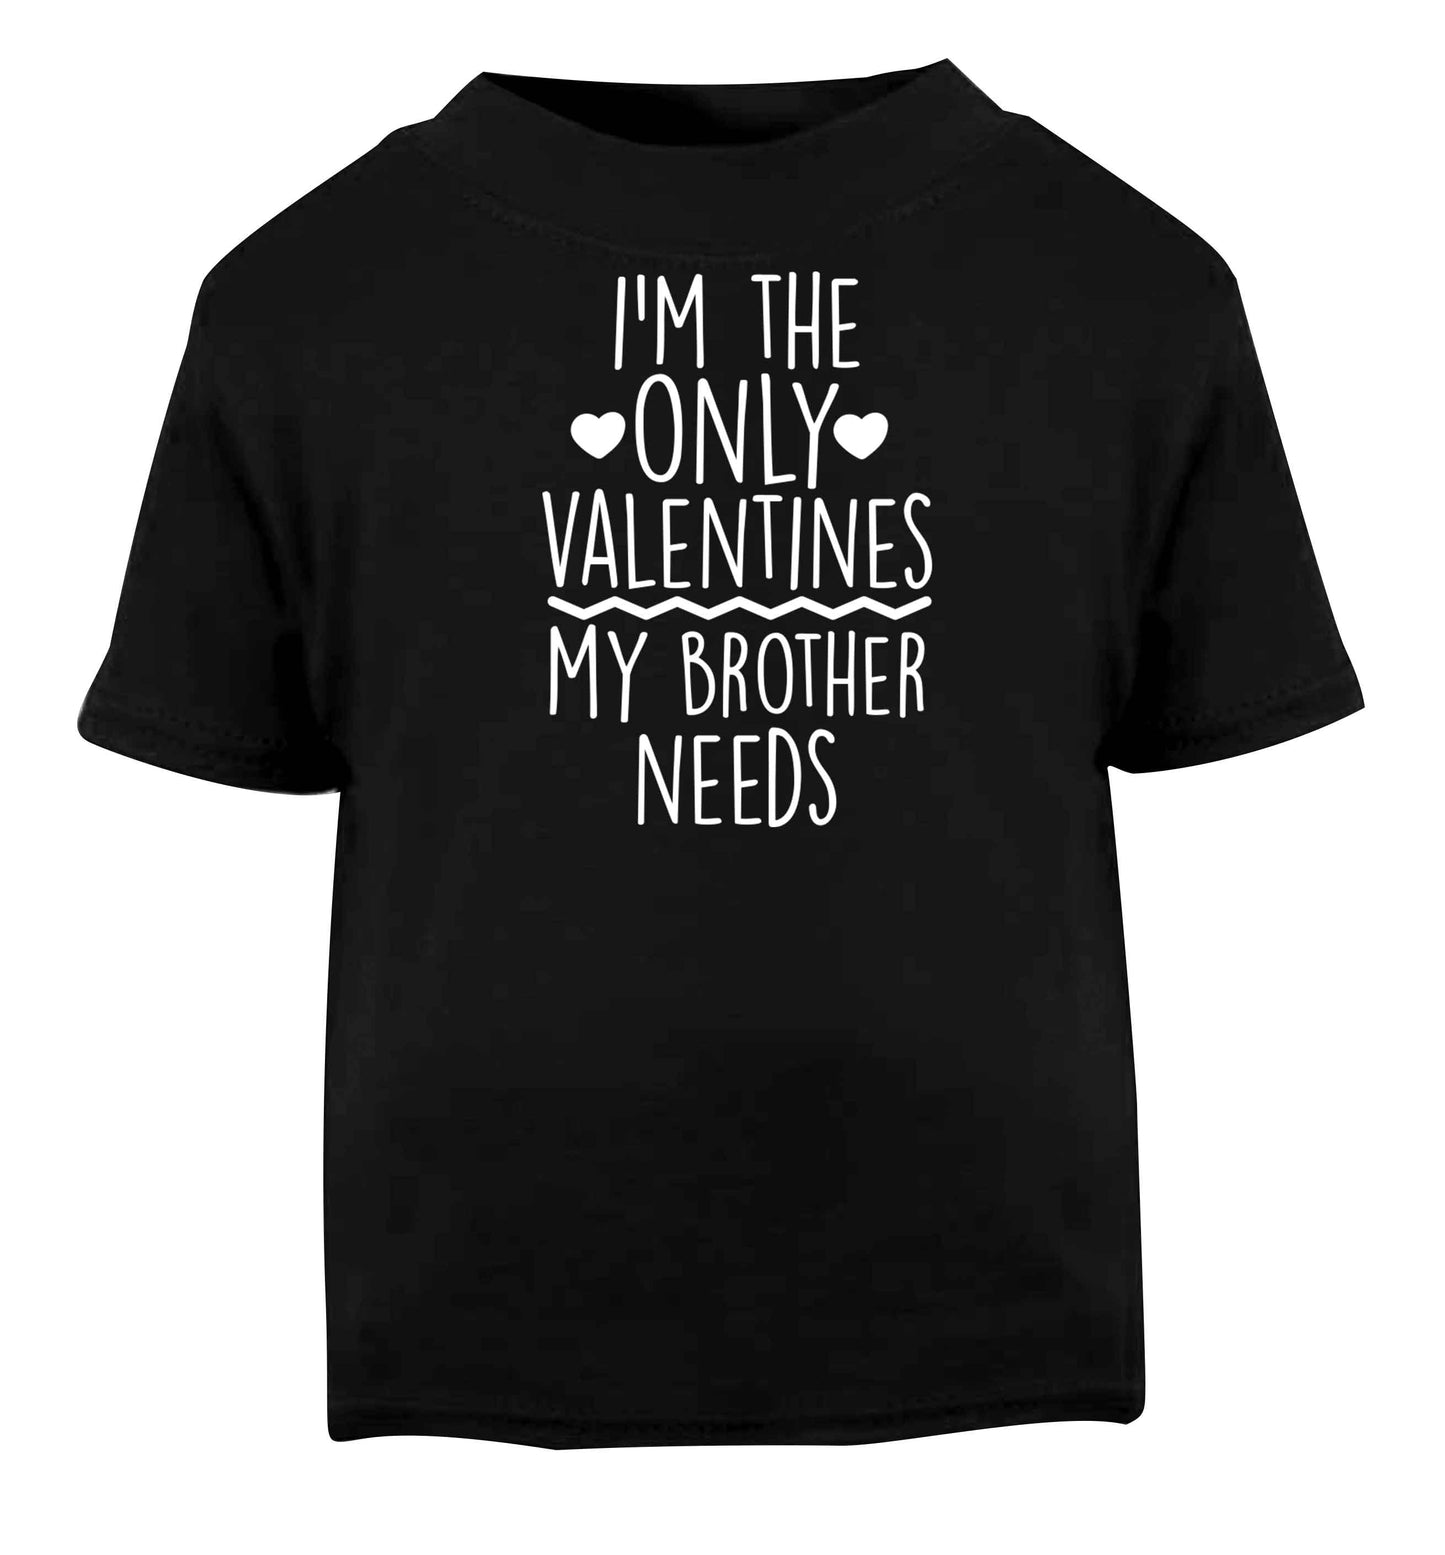 I'm the only valentines my brother needs Black baby toddler Tshirt 2 years